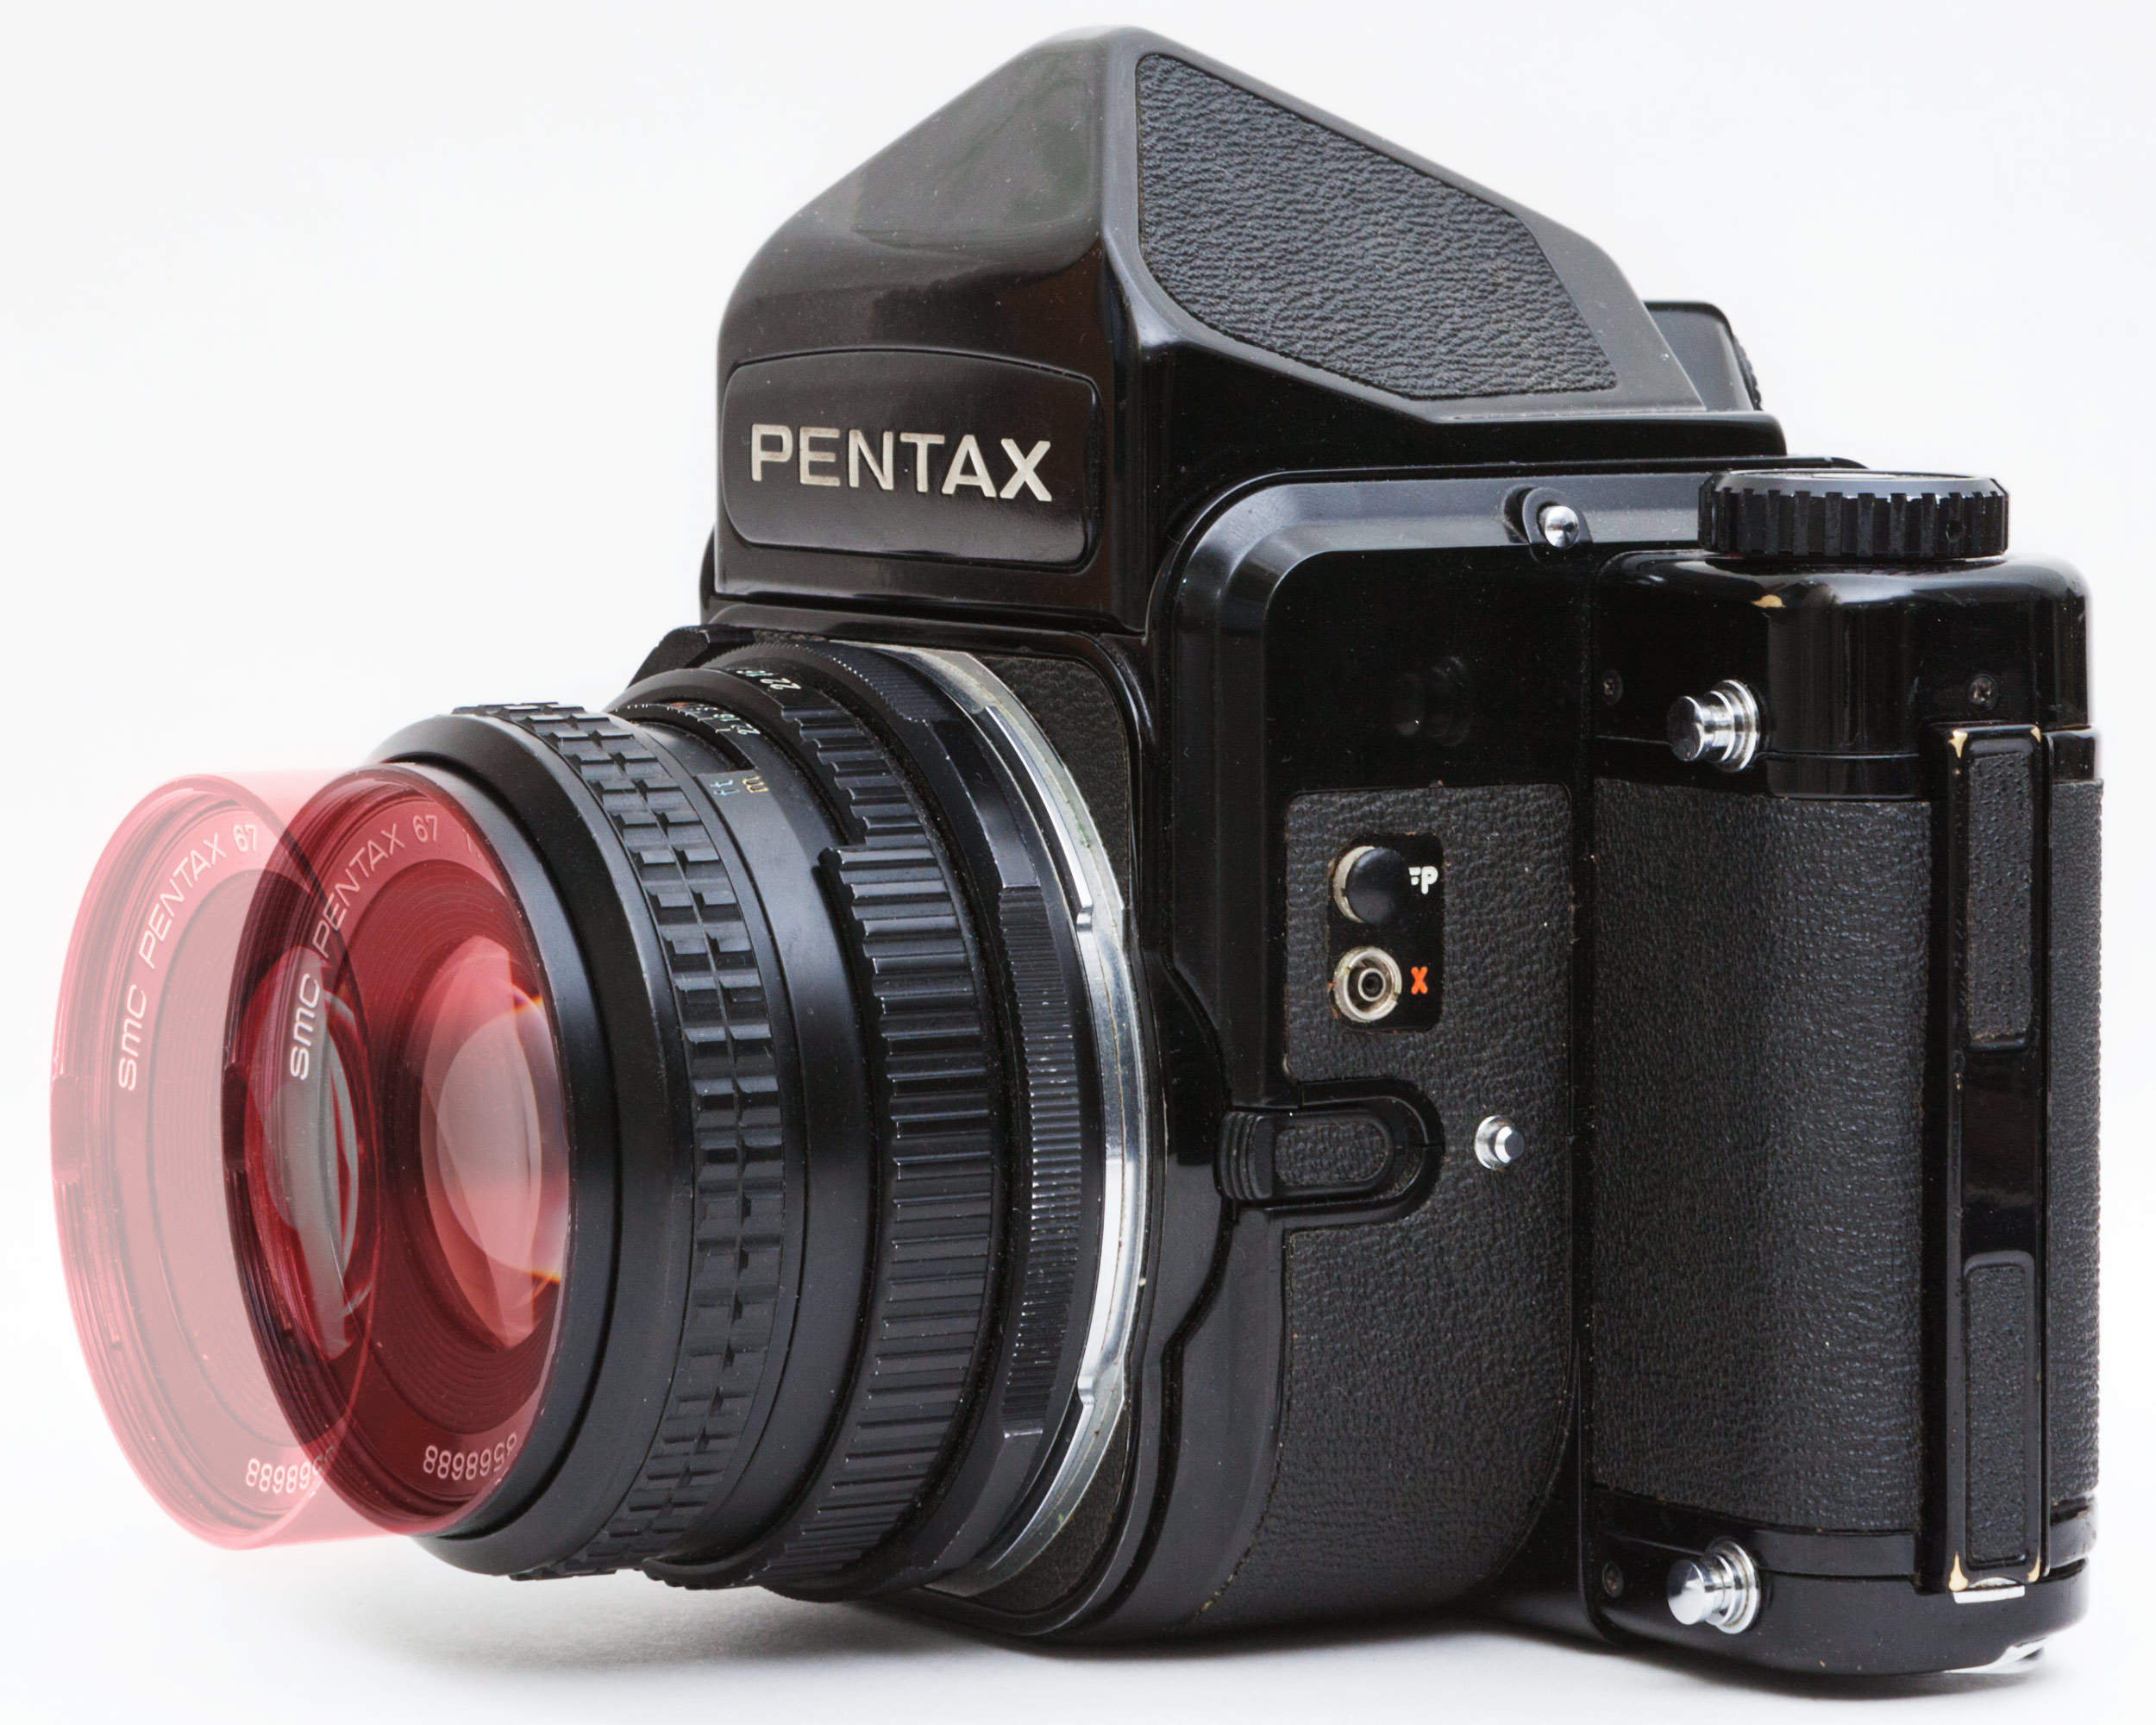 Pentax 67 90mm F2.8: Lens review, Details, Experience, Sample images